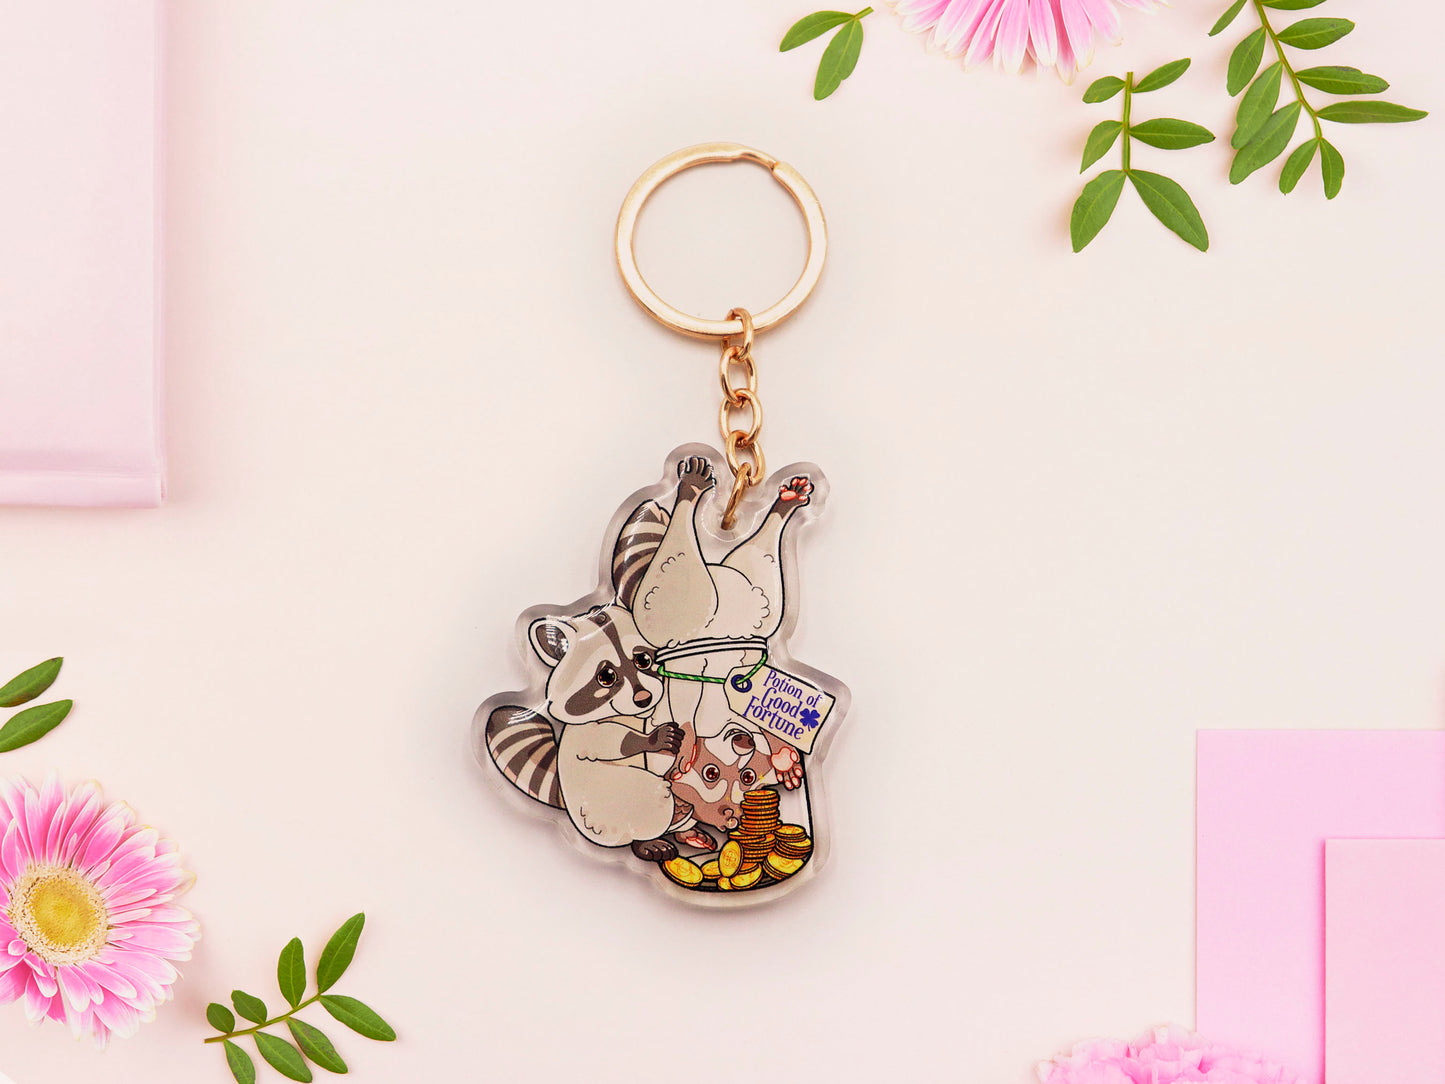 Clear acrylic keychain with gold chain clasp of two cheeky raccoons stealing gold coins from inside a potion bottle labelled potion of good fortune